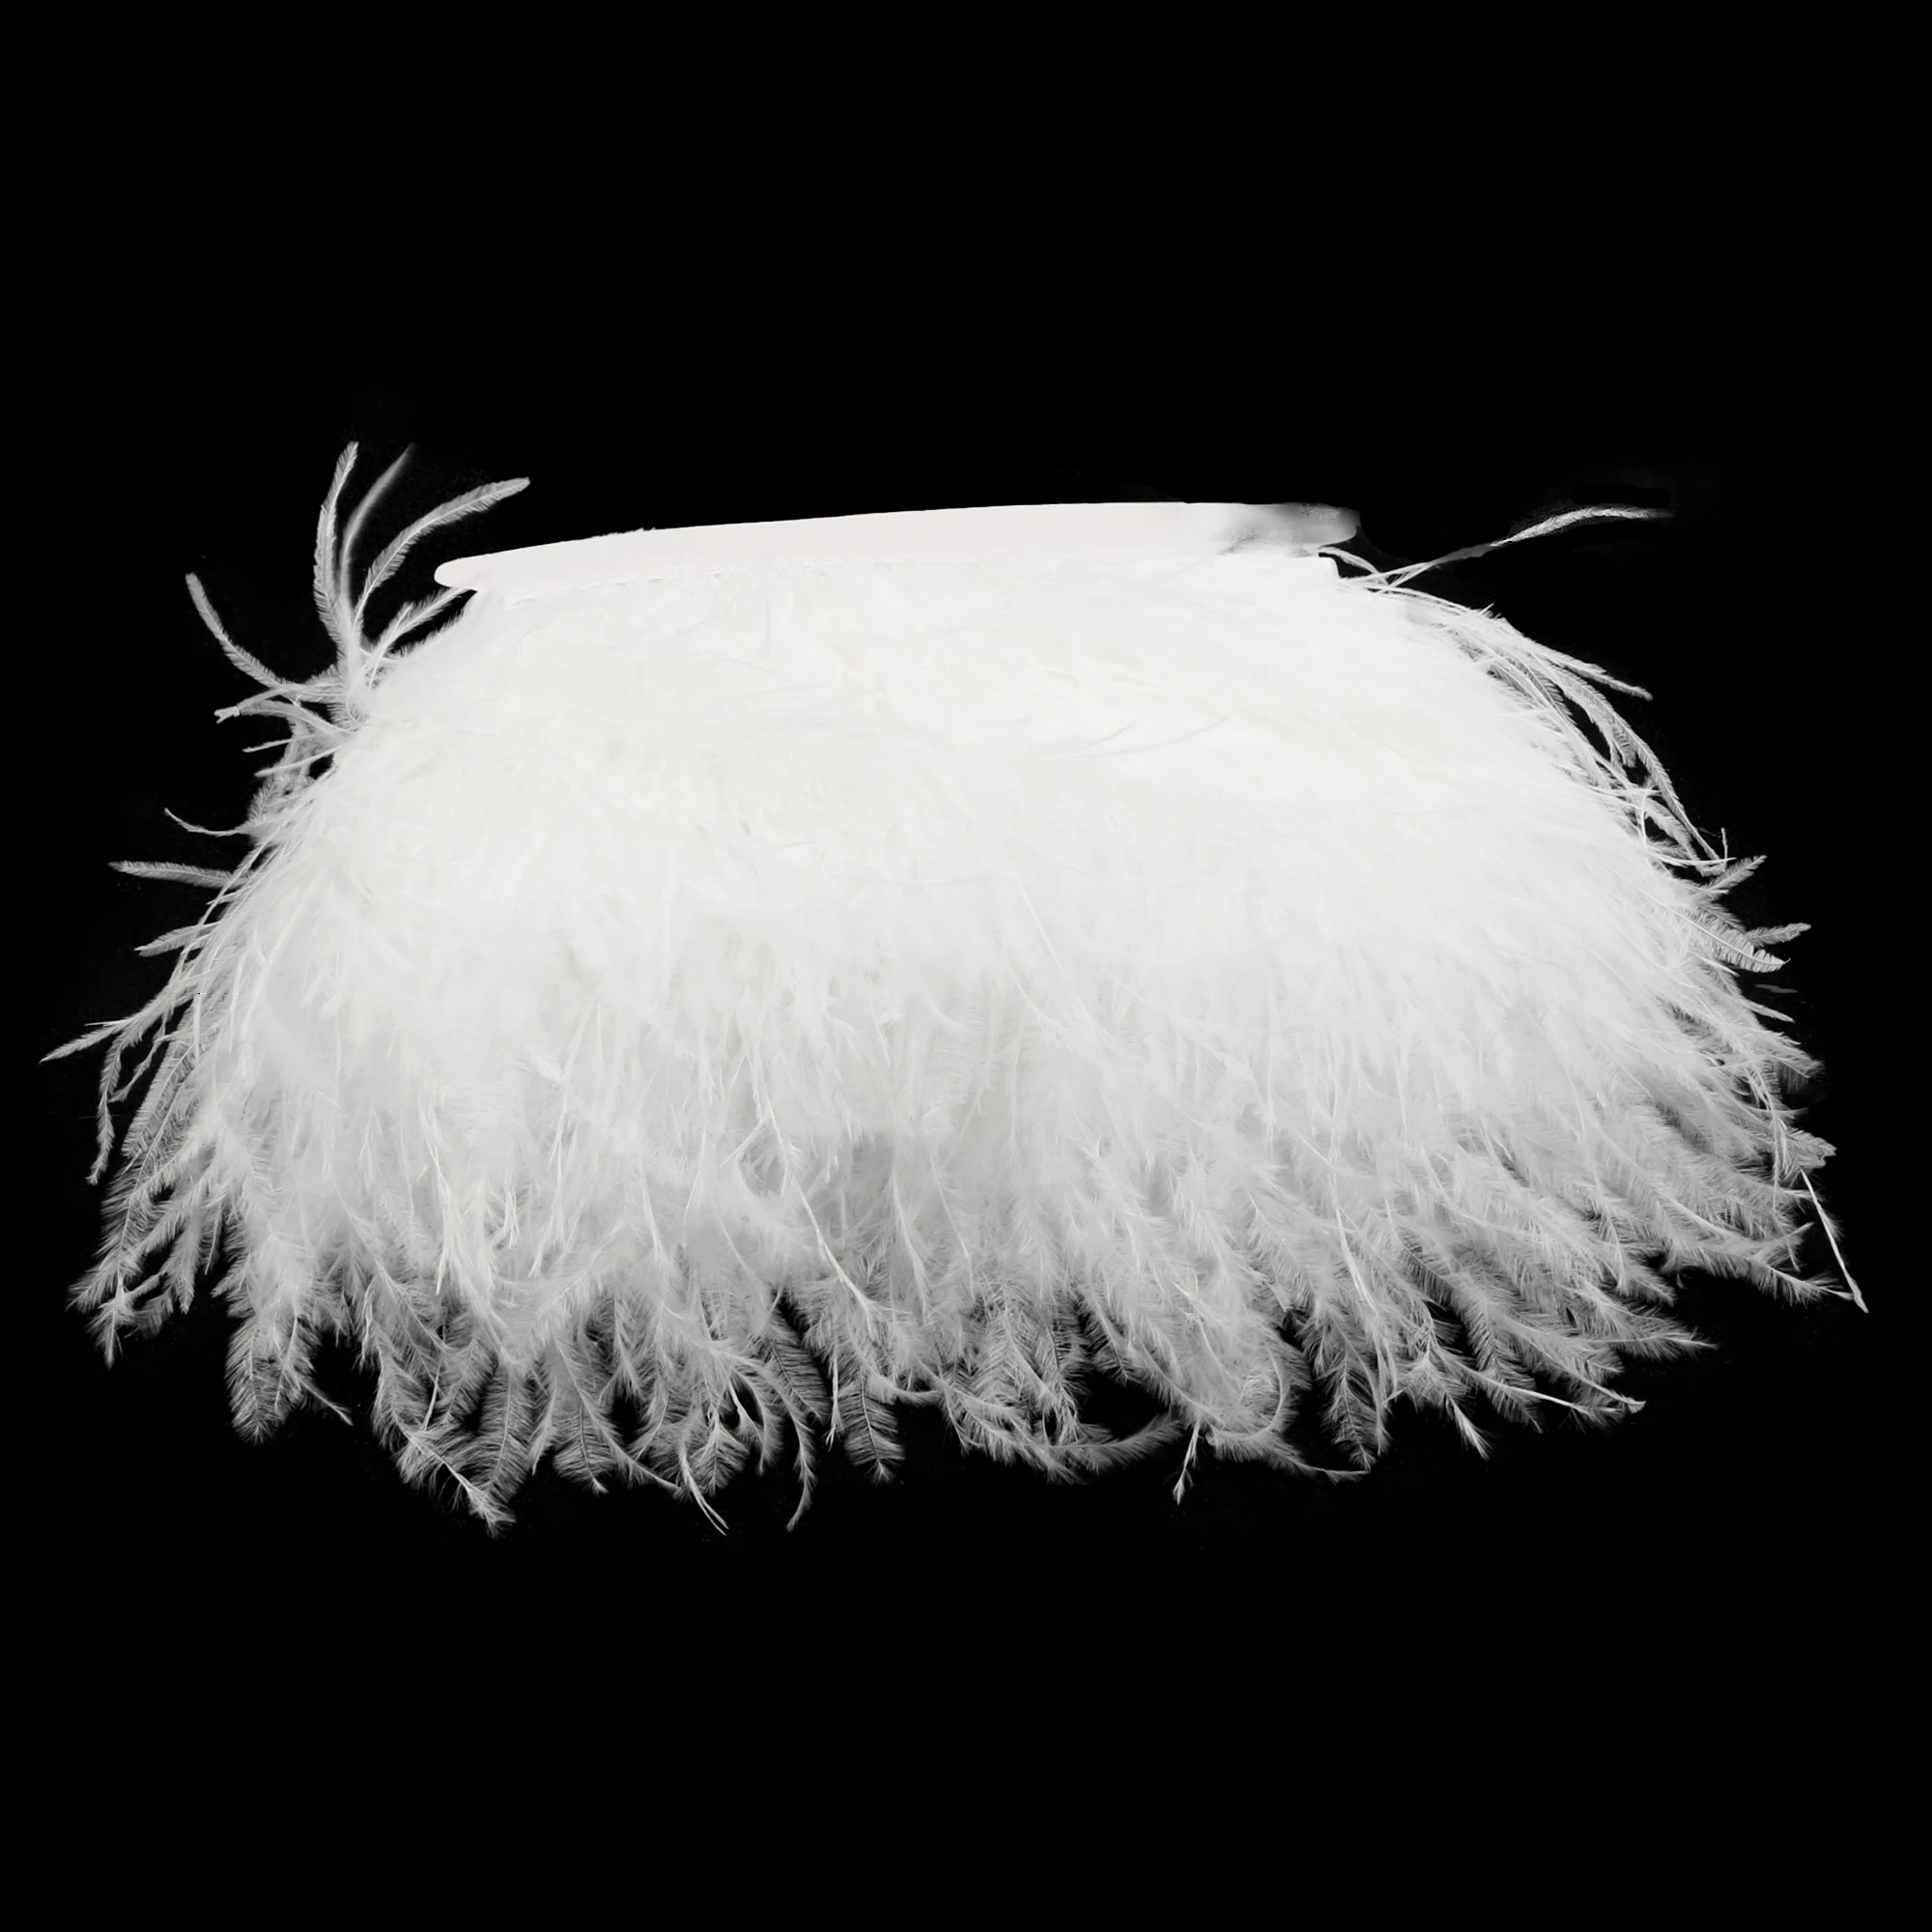 Free Shipping 10-15cm Black Ostrich Feather Trim - China Feather